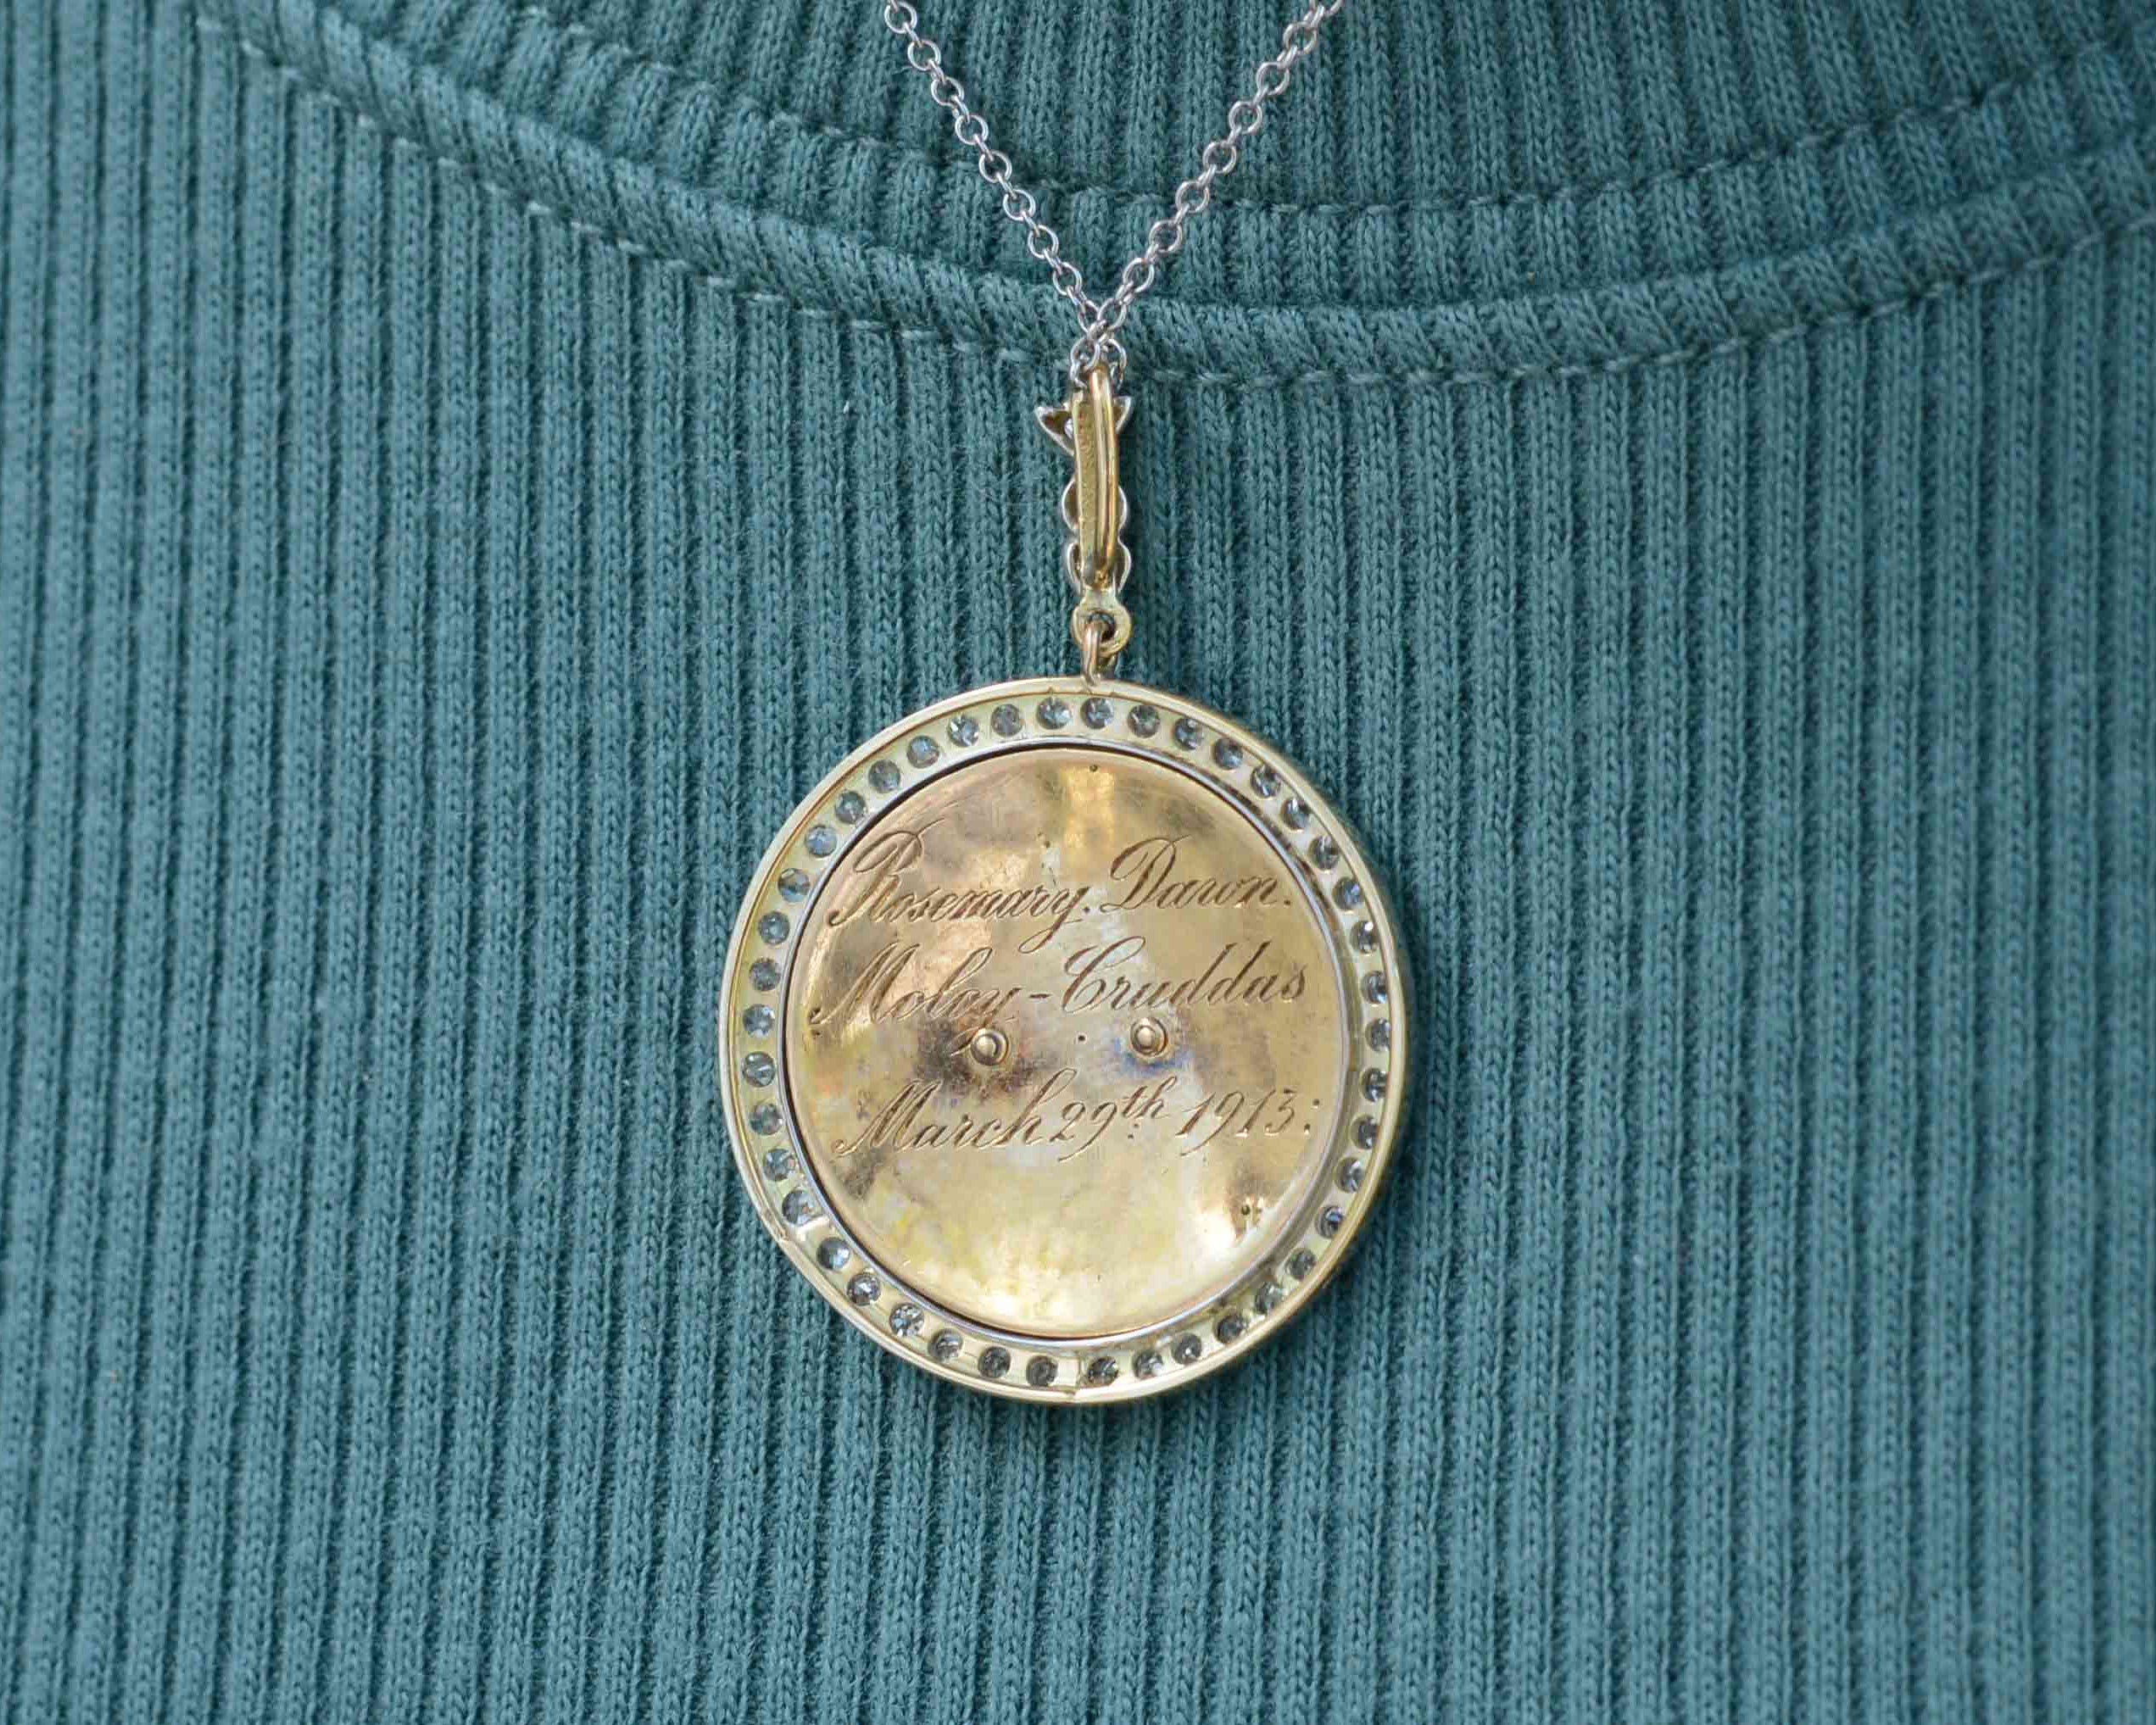 Rich in history, this pendant is hand engraved en verso and dated March 29, 1913.